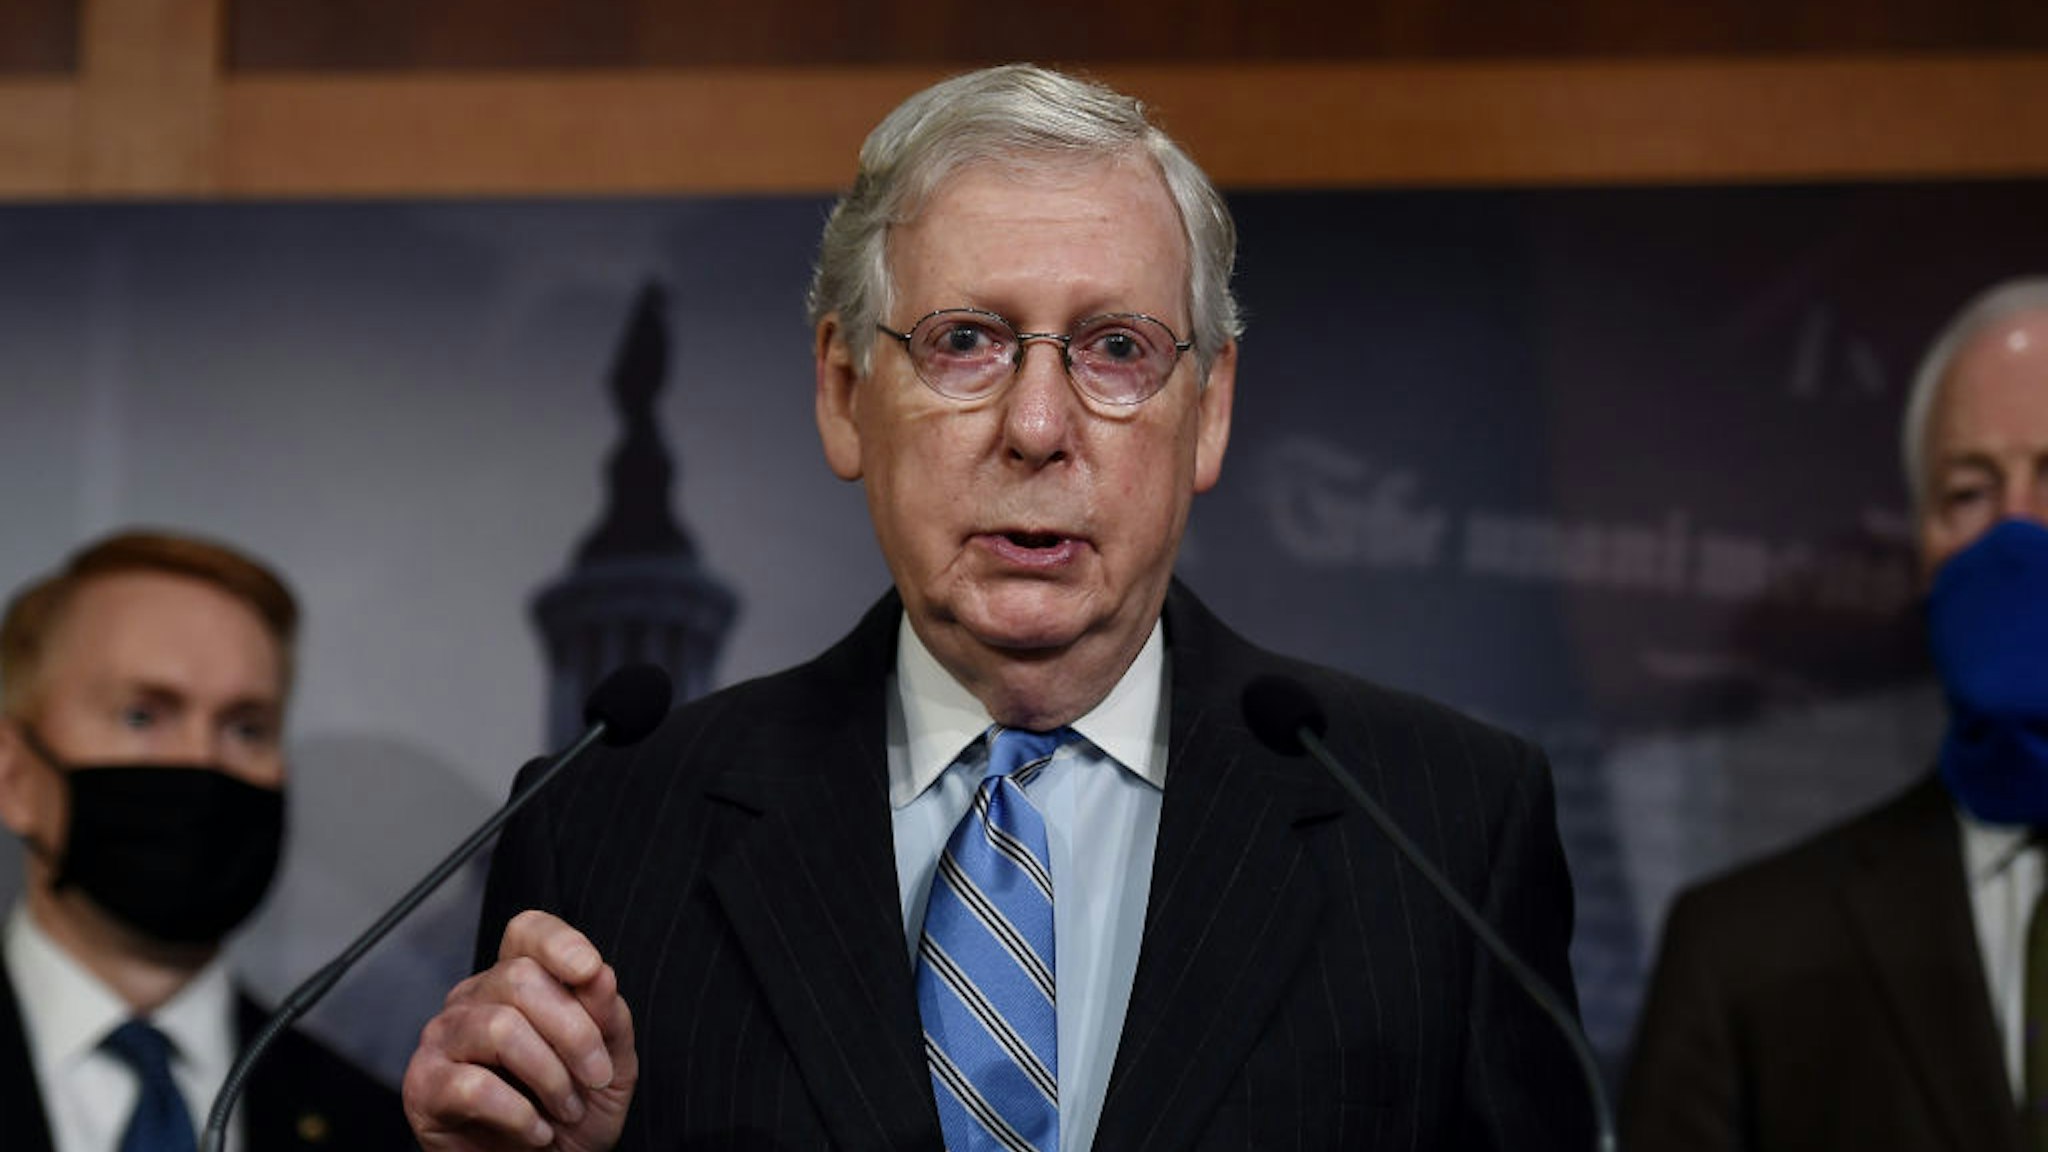 Republican Senate Majority Leader Mitch McConnell(R-KY) speaks during a news conference to announce that the Senate is considering police reform legislation, at the US Capitol on June 17, 2020 in Washington, DC. (Photo by Olivier DOULIERY / AFP) (Photo by OLIVIER DOULIERY/AFP via Getty Images)